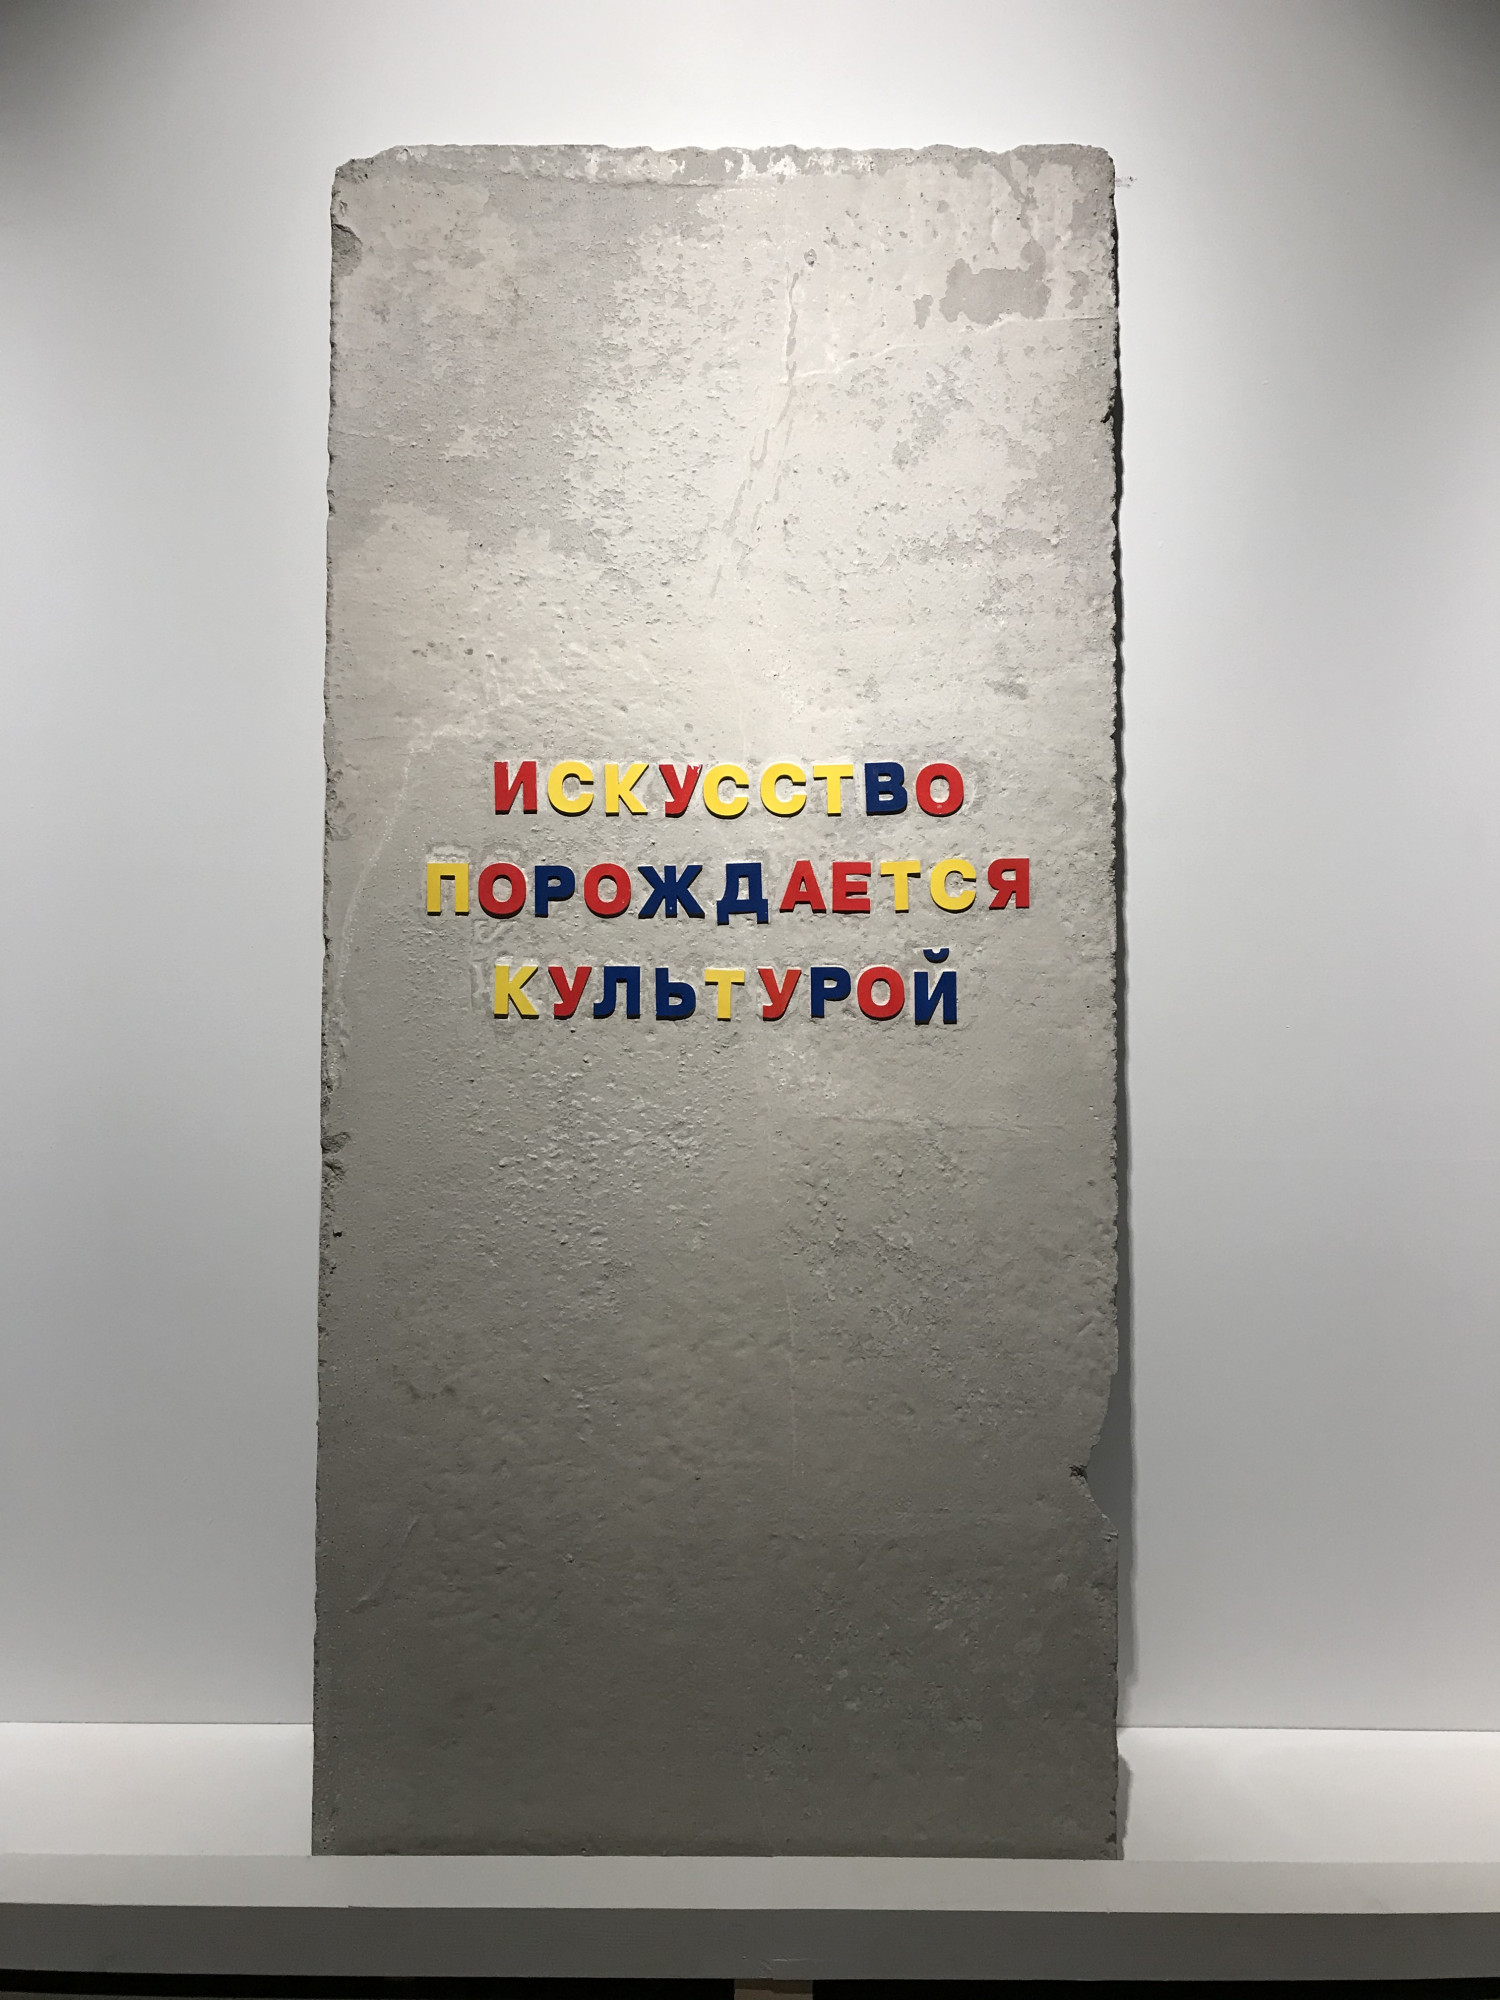 Freedom to Be an Artist, 2020, Nemoskva exhibition. “Art is generated by culture”